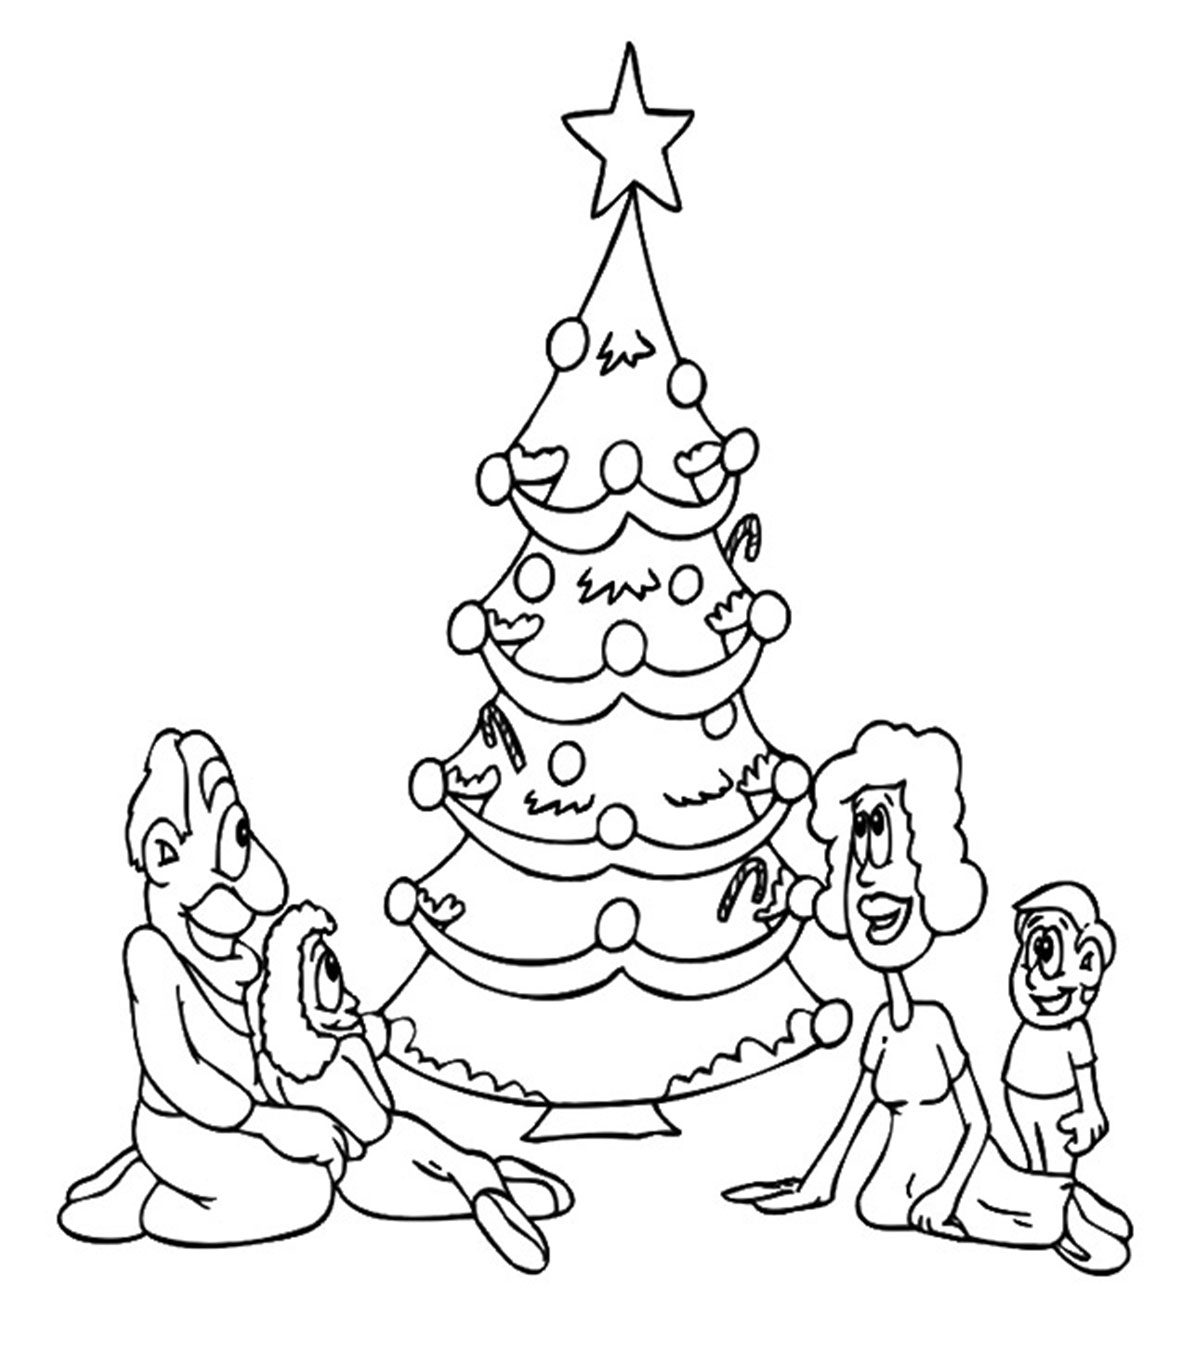 Download Top 35 Free Printable Christmas Tree Coloring Pages Online